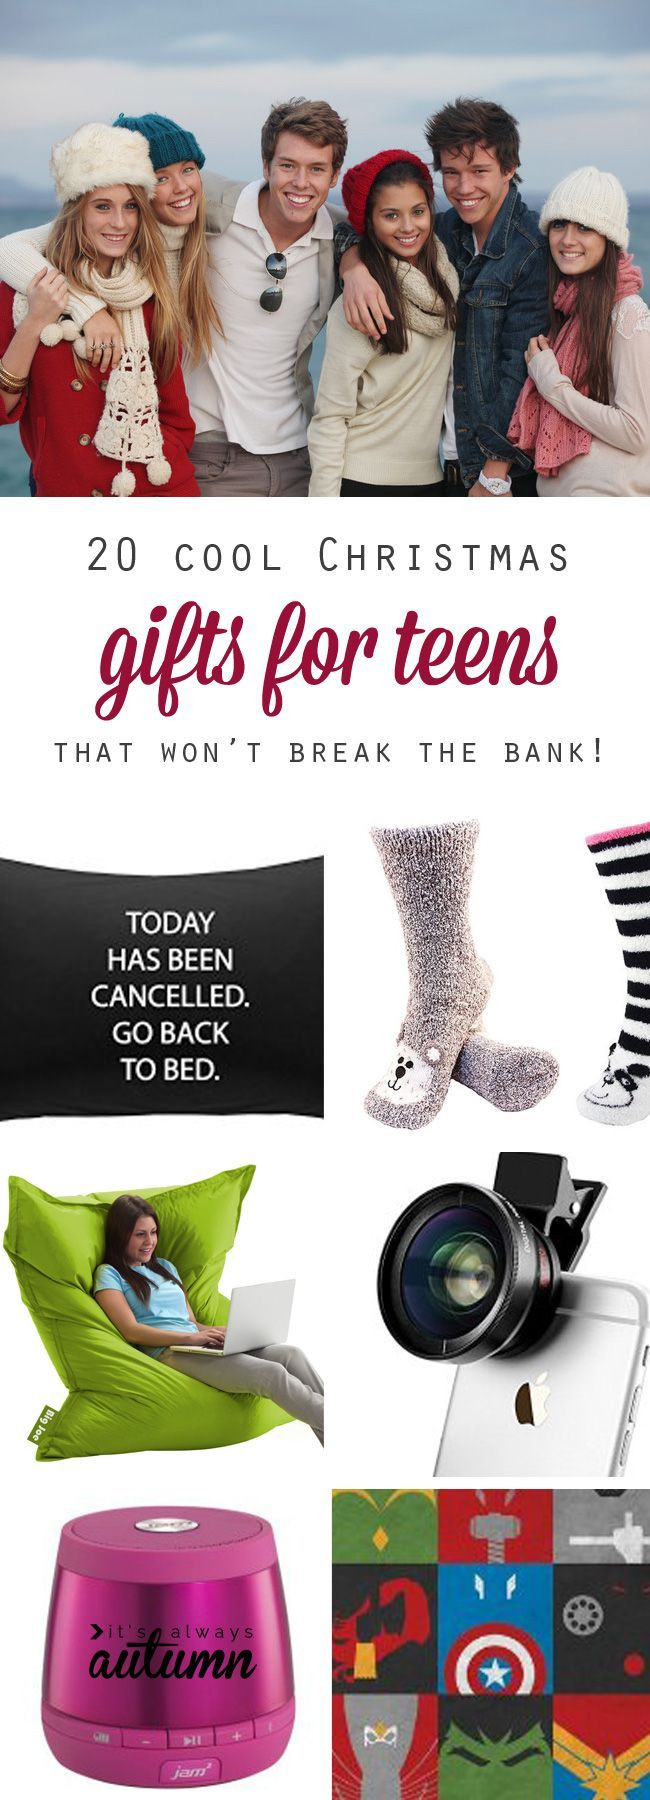 Xmas Gift Ideas For Girls
 17 Best images about Gift Ideas for boys on Pinterest